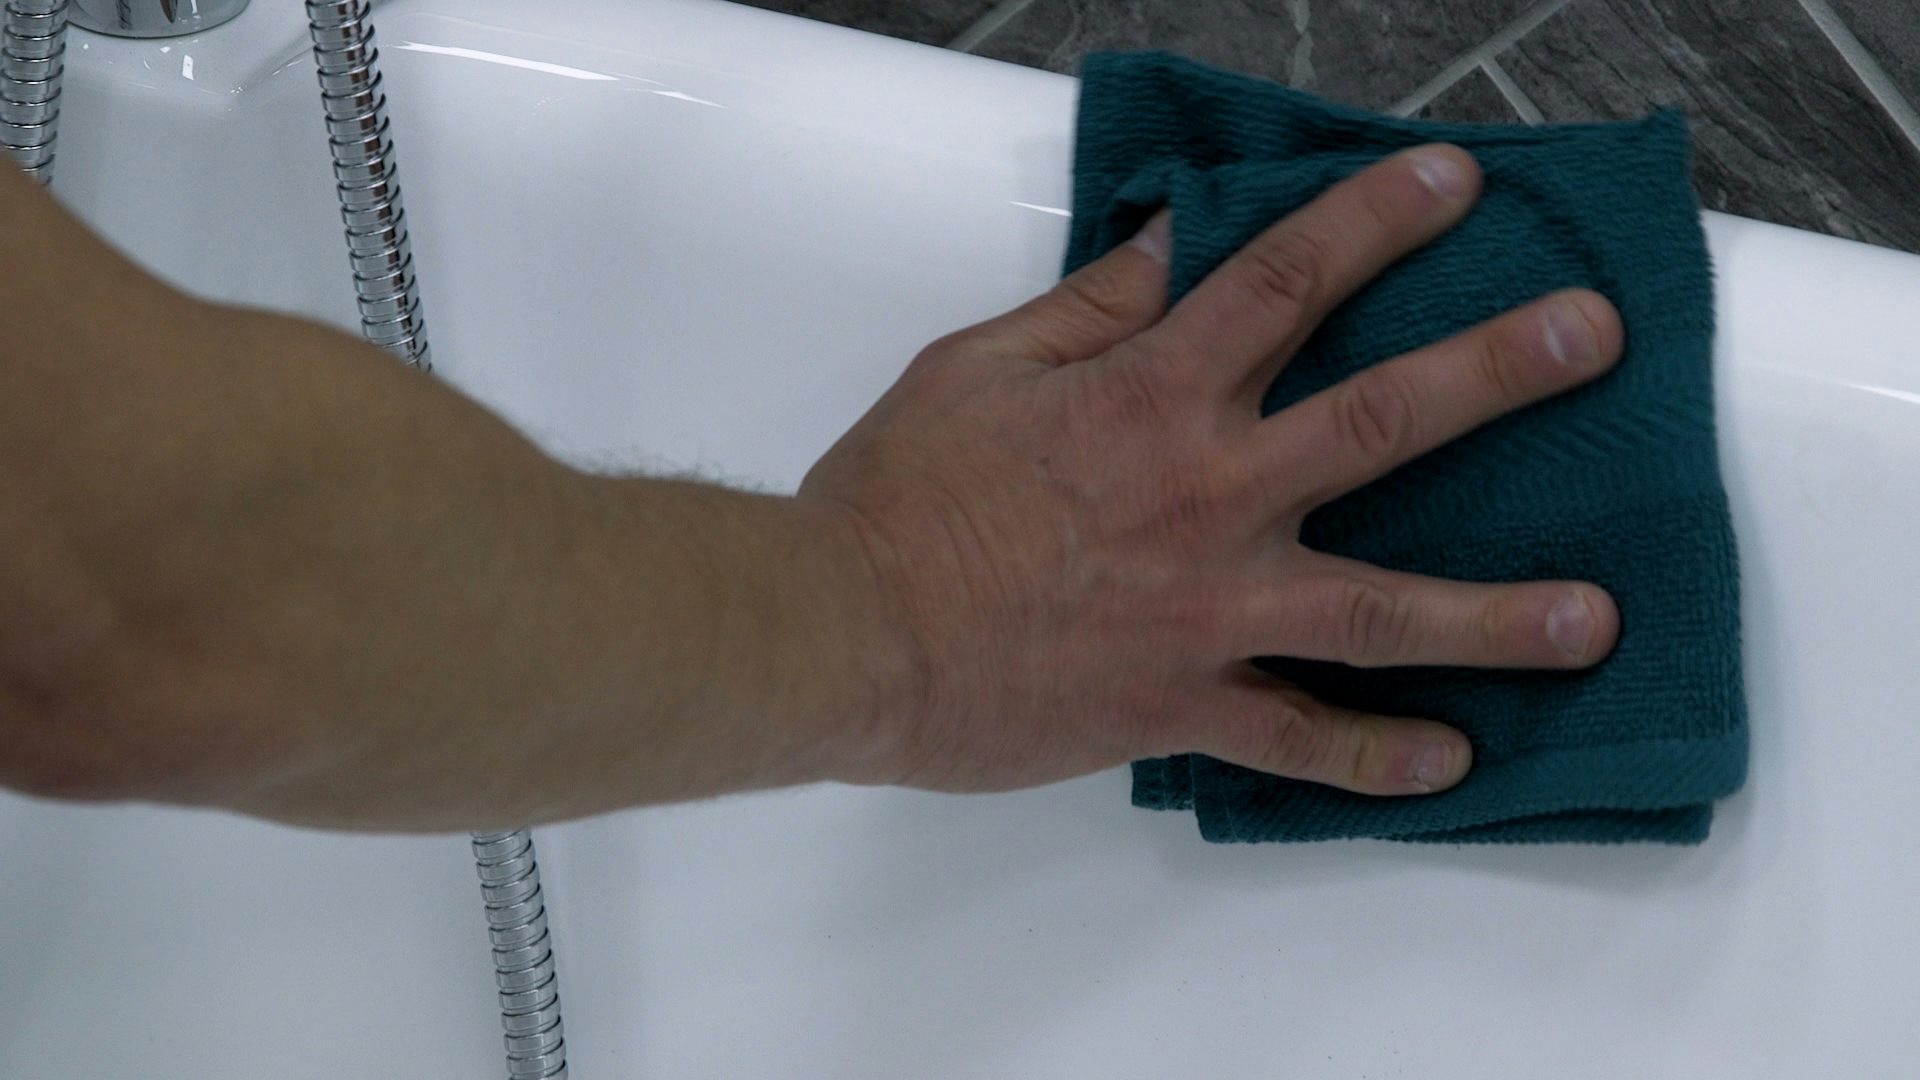 Wiping away with a soft, non-abrasive cloth